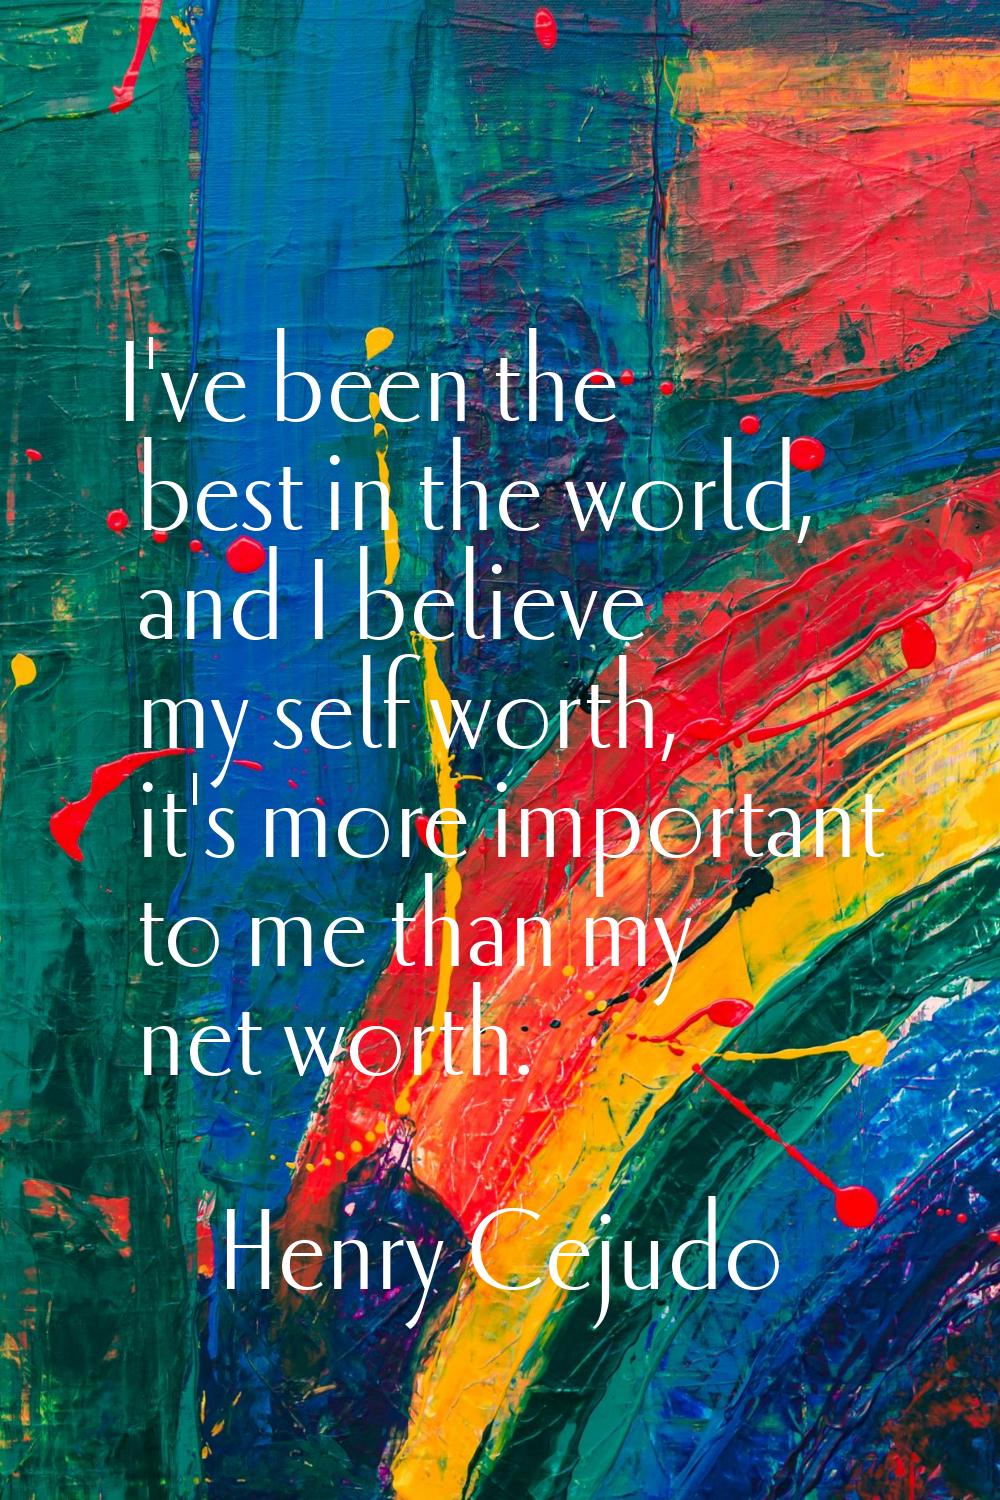 I've been the best in the world, and I believe my self worth, it's more important to me than my net